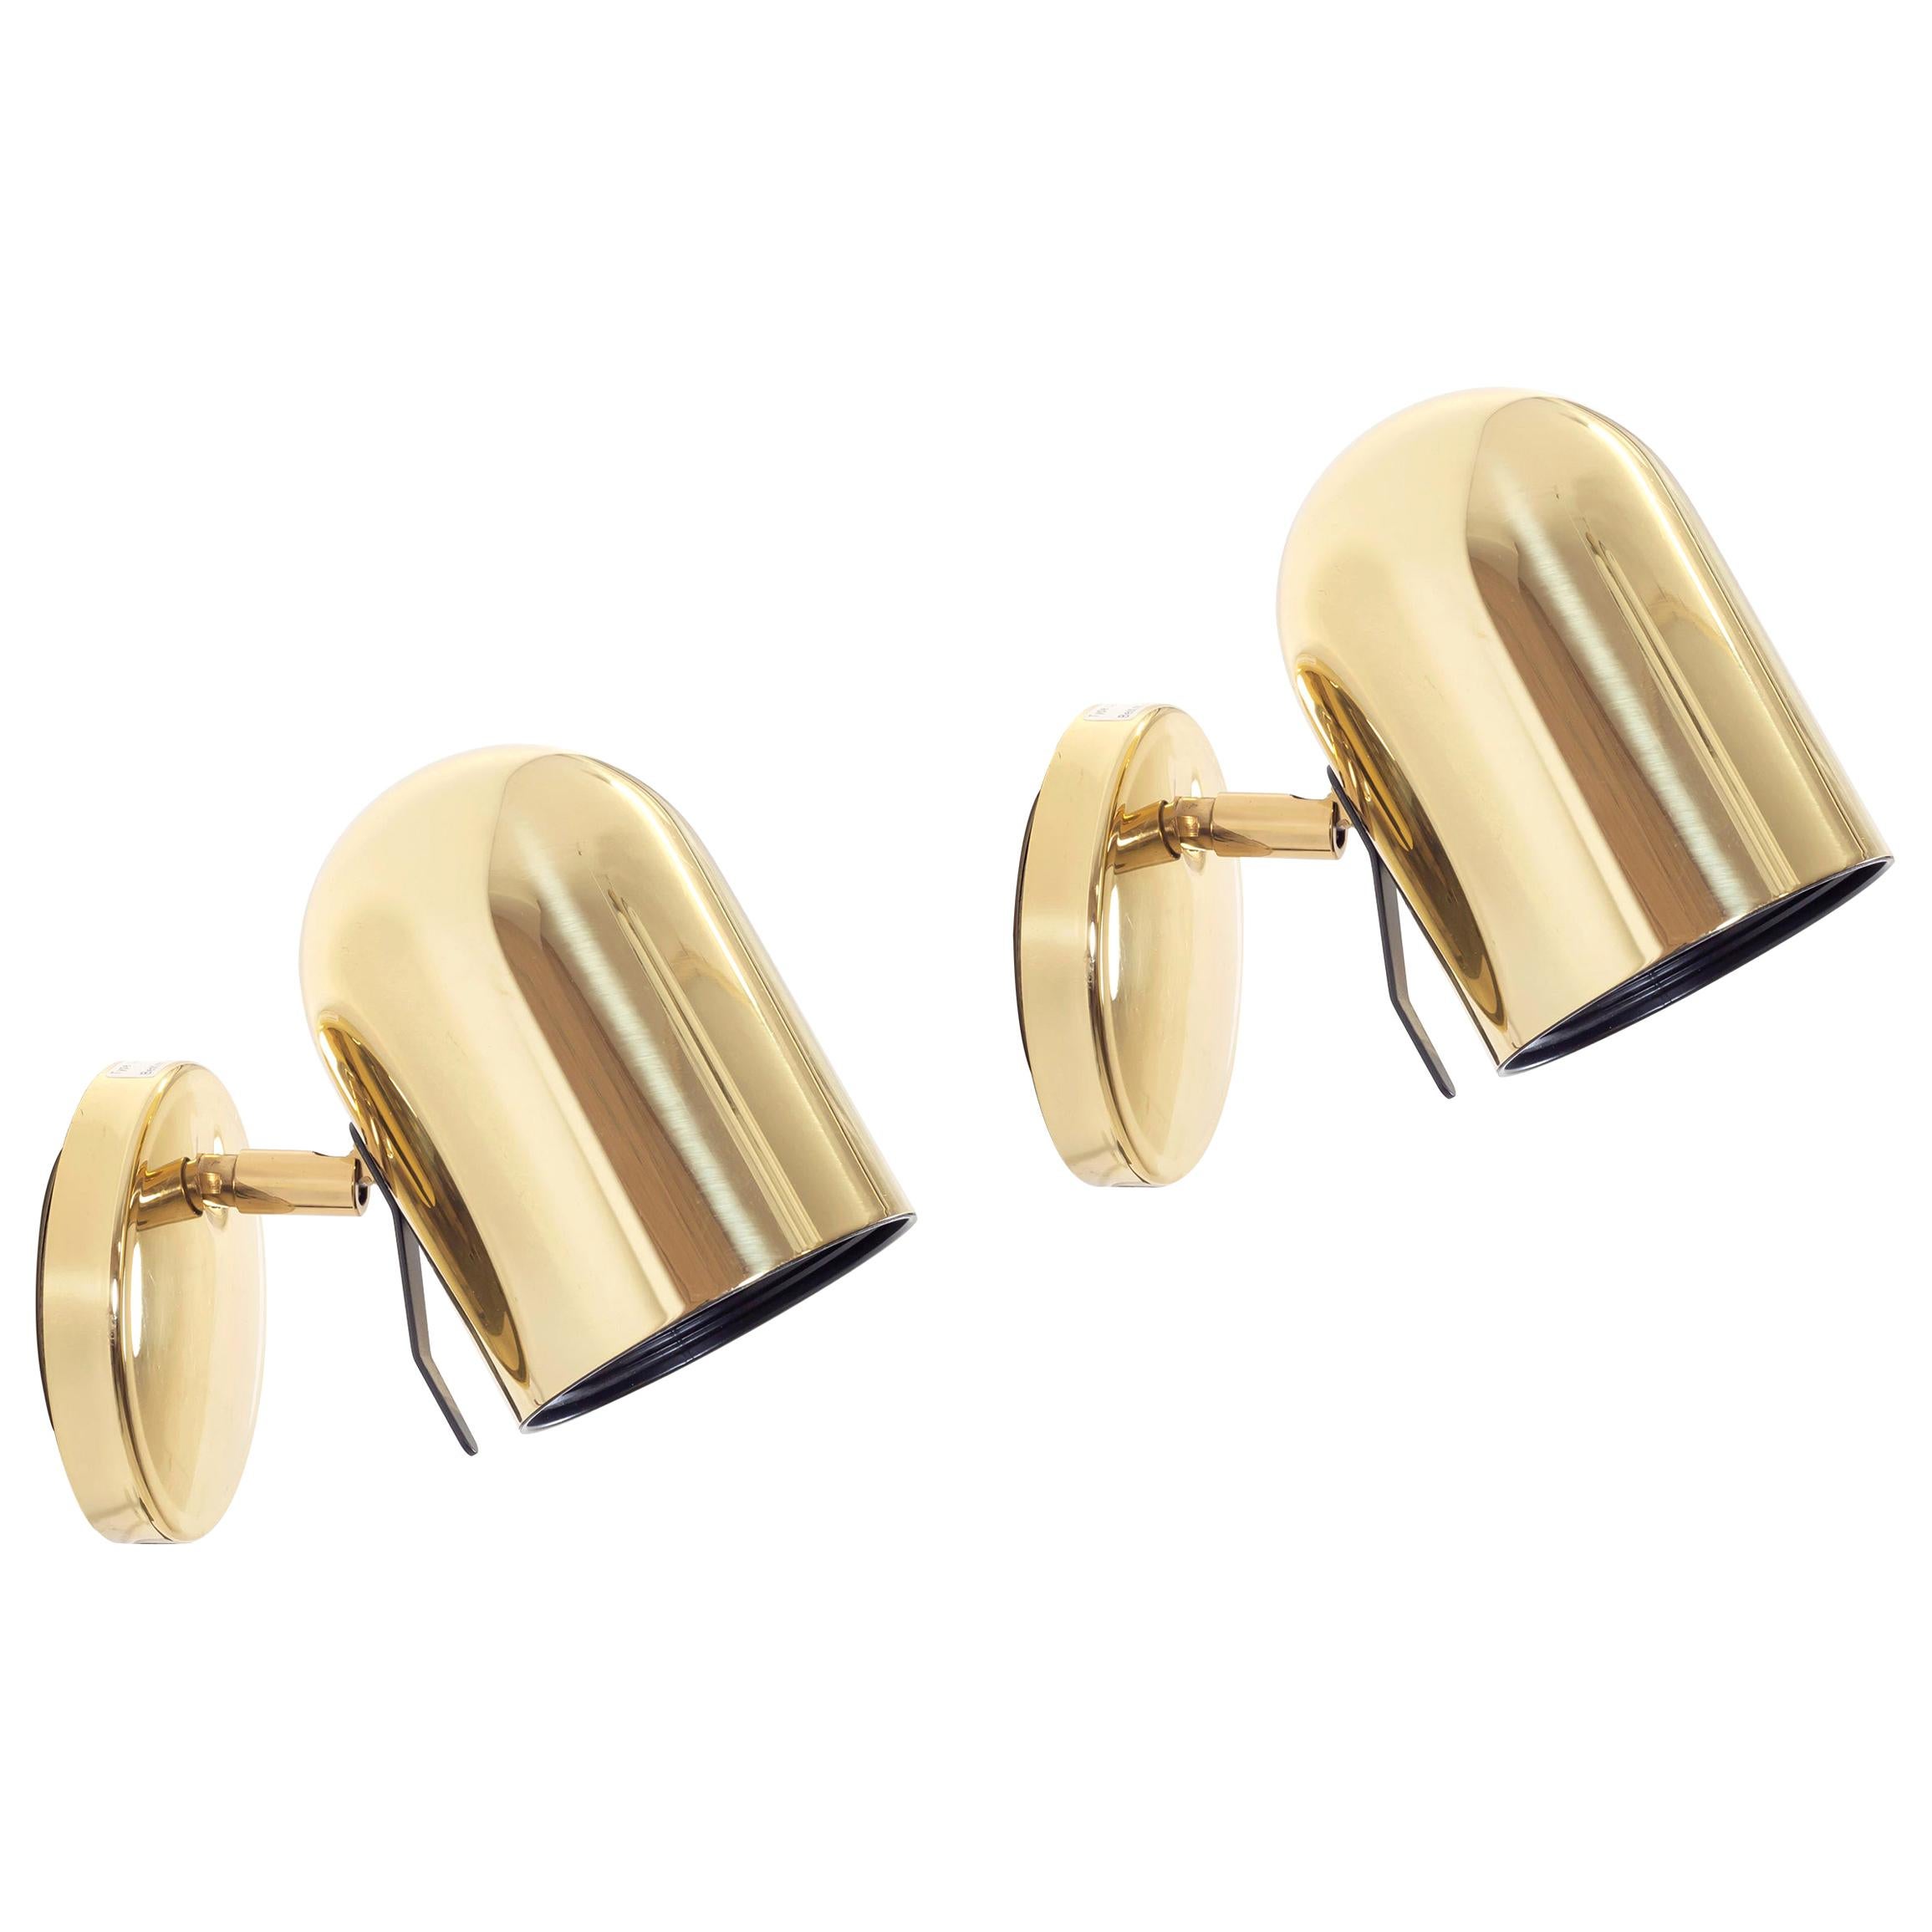 Pair of Scandinavian Wall Lights by Jonas Hidle, Norway, 1970s For Sale